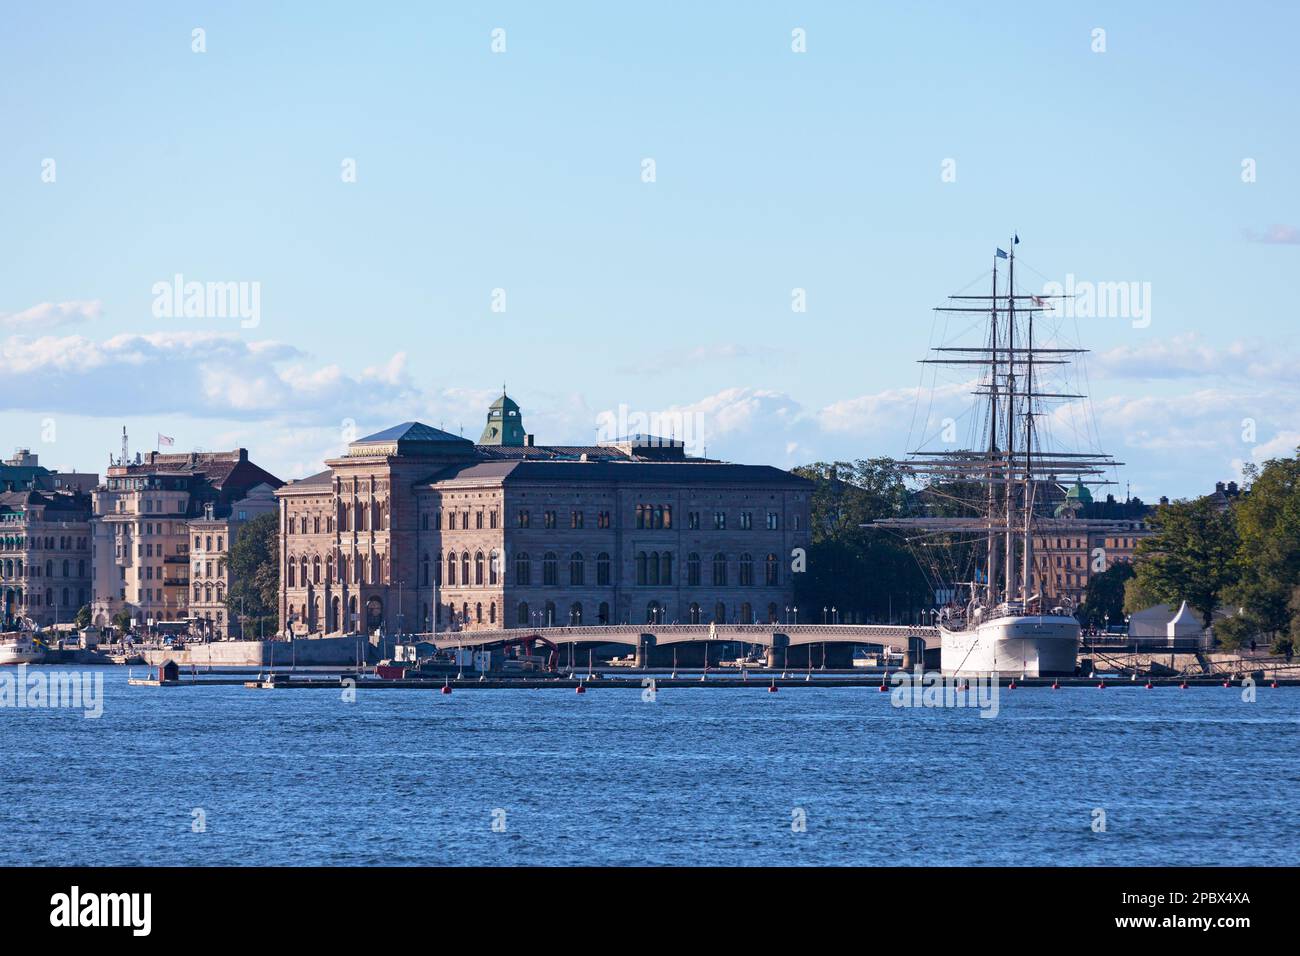 Stockholm, Sweden - June 24 2019: The Nationalmuseum (or National Museum of Fine Arts) is the national gallery located on the peninsula Blasieholmen i Stock Photo